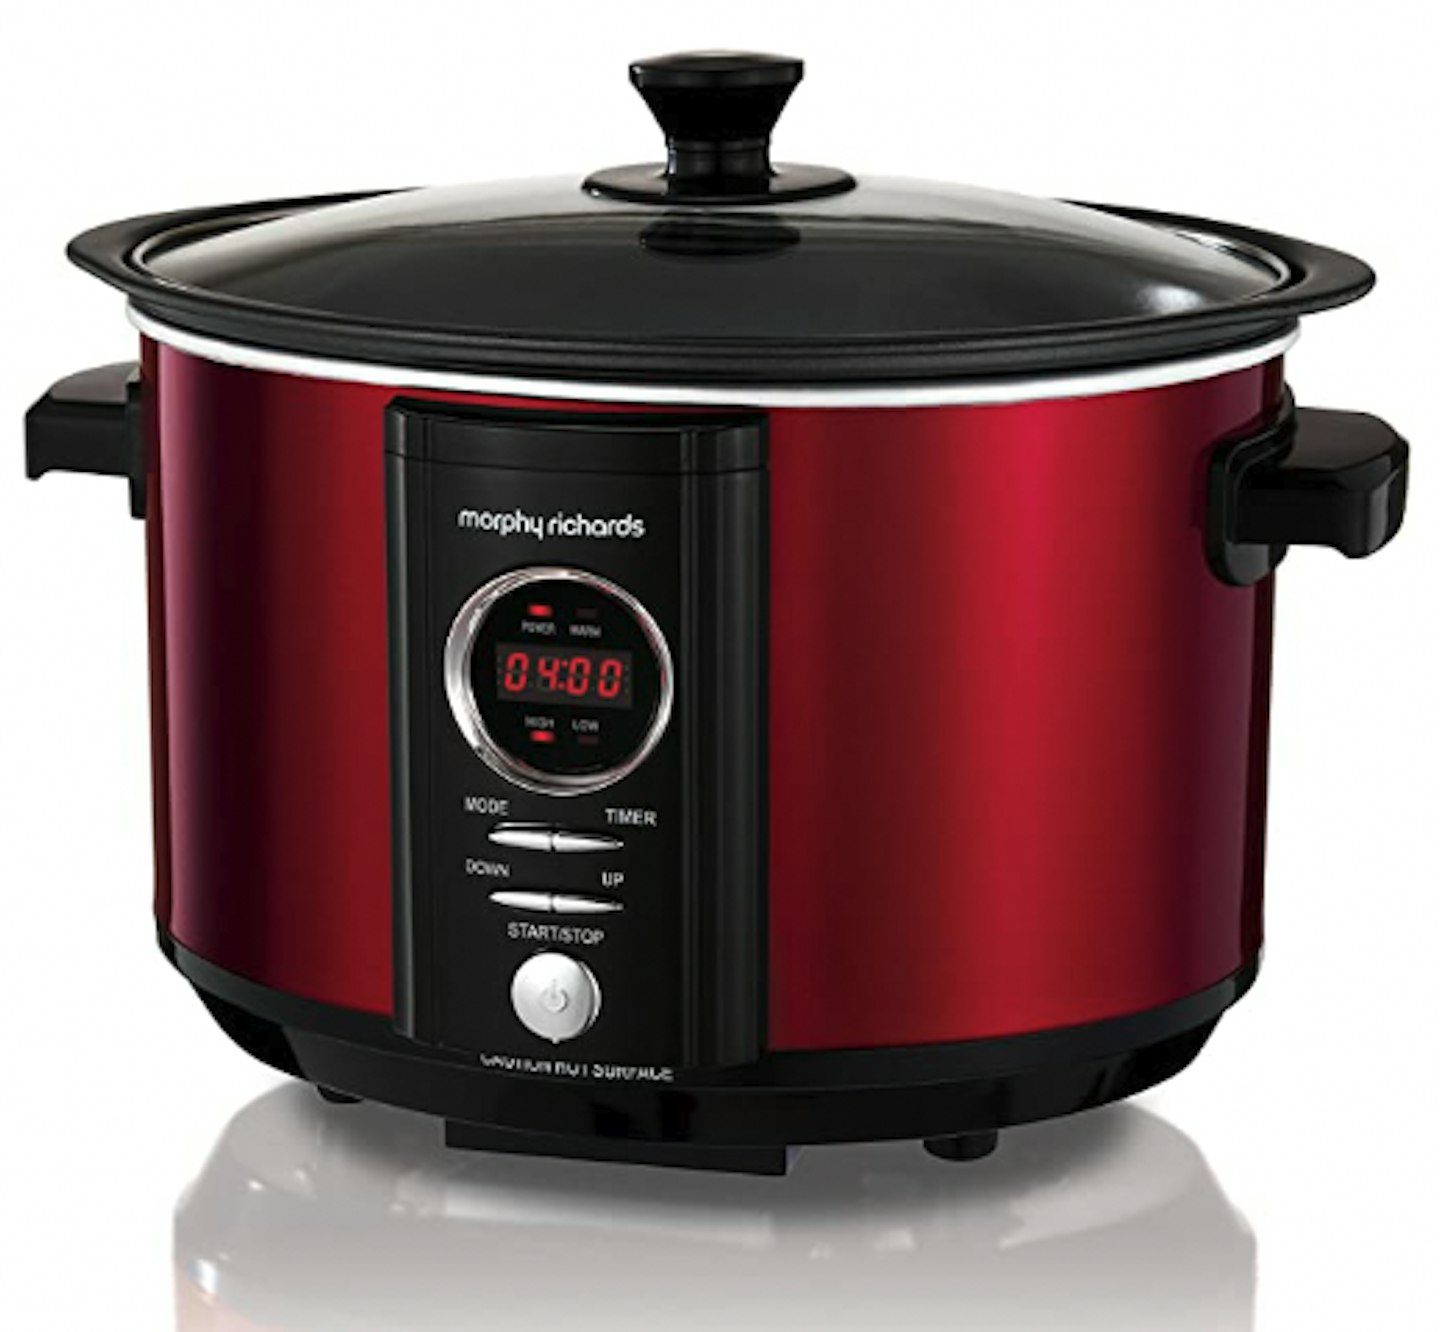 Morphy Richards Sear and Stew Digital Slow Cooker